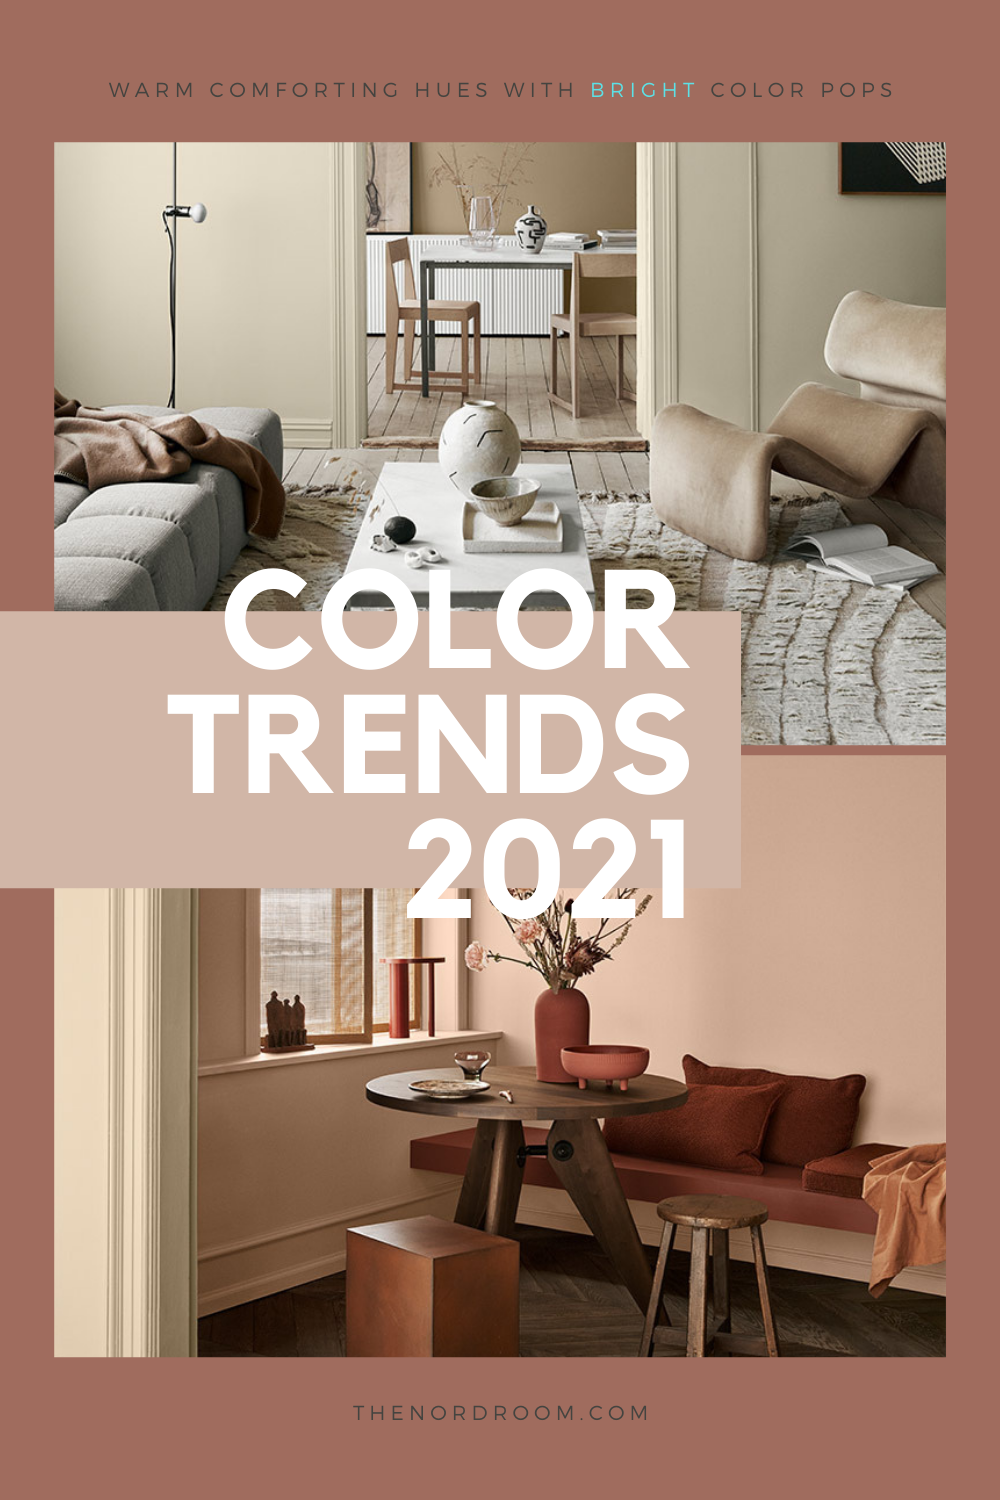 The Color Trends For 2021 Warm Comforting Hues And Bright Color Pops The Nordroom Here are the top interior paint colors for 2021: the color trends for 2021 warm